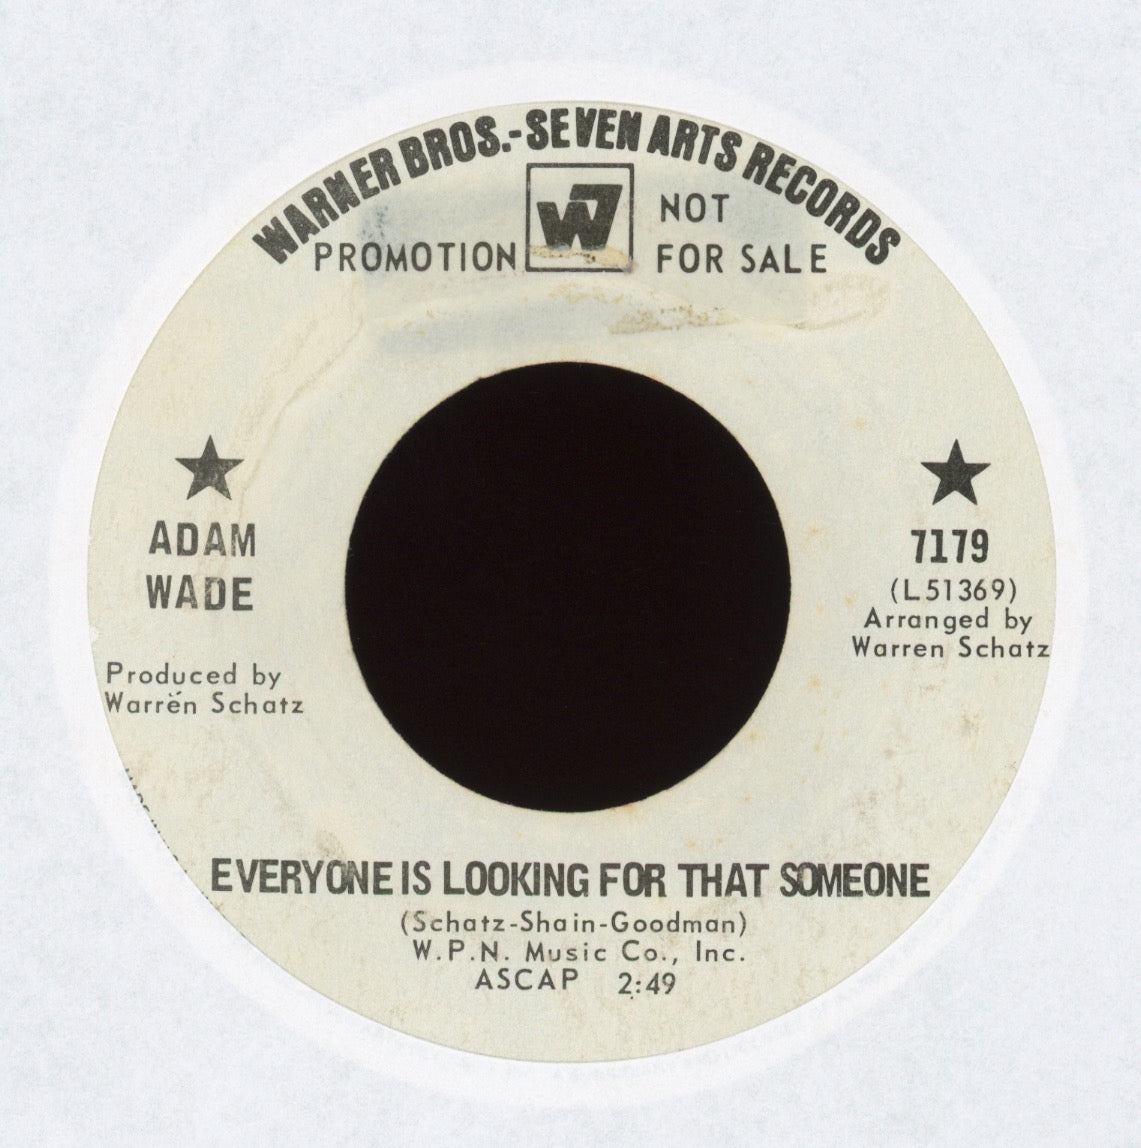 Adam Wade - Everyone Is Looking For That Someone on Warner Seven Arts Promo